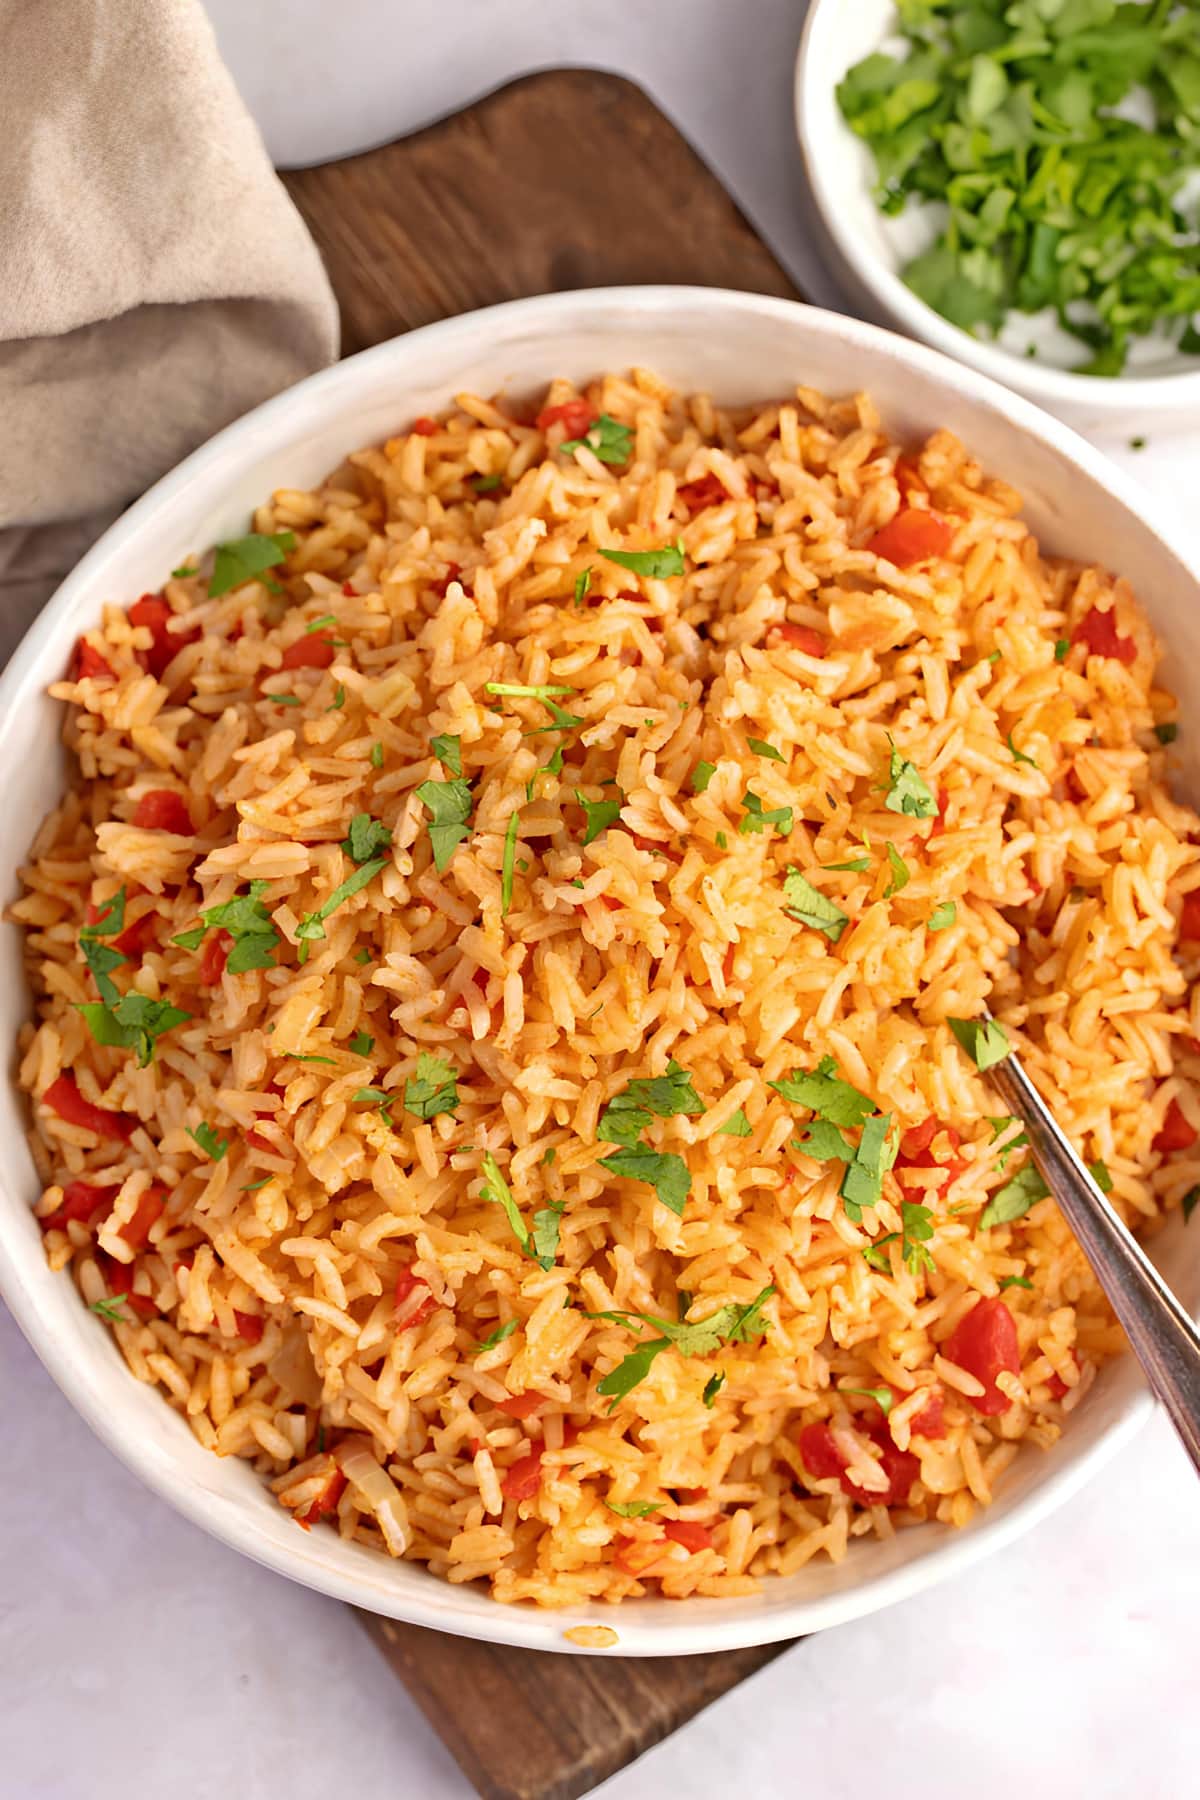 Savory and Flavorful Spanish Rice with Herbs and Onions Top View